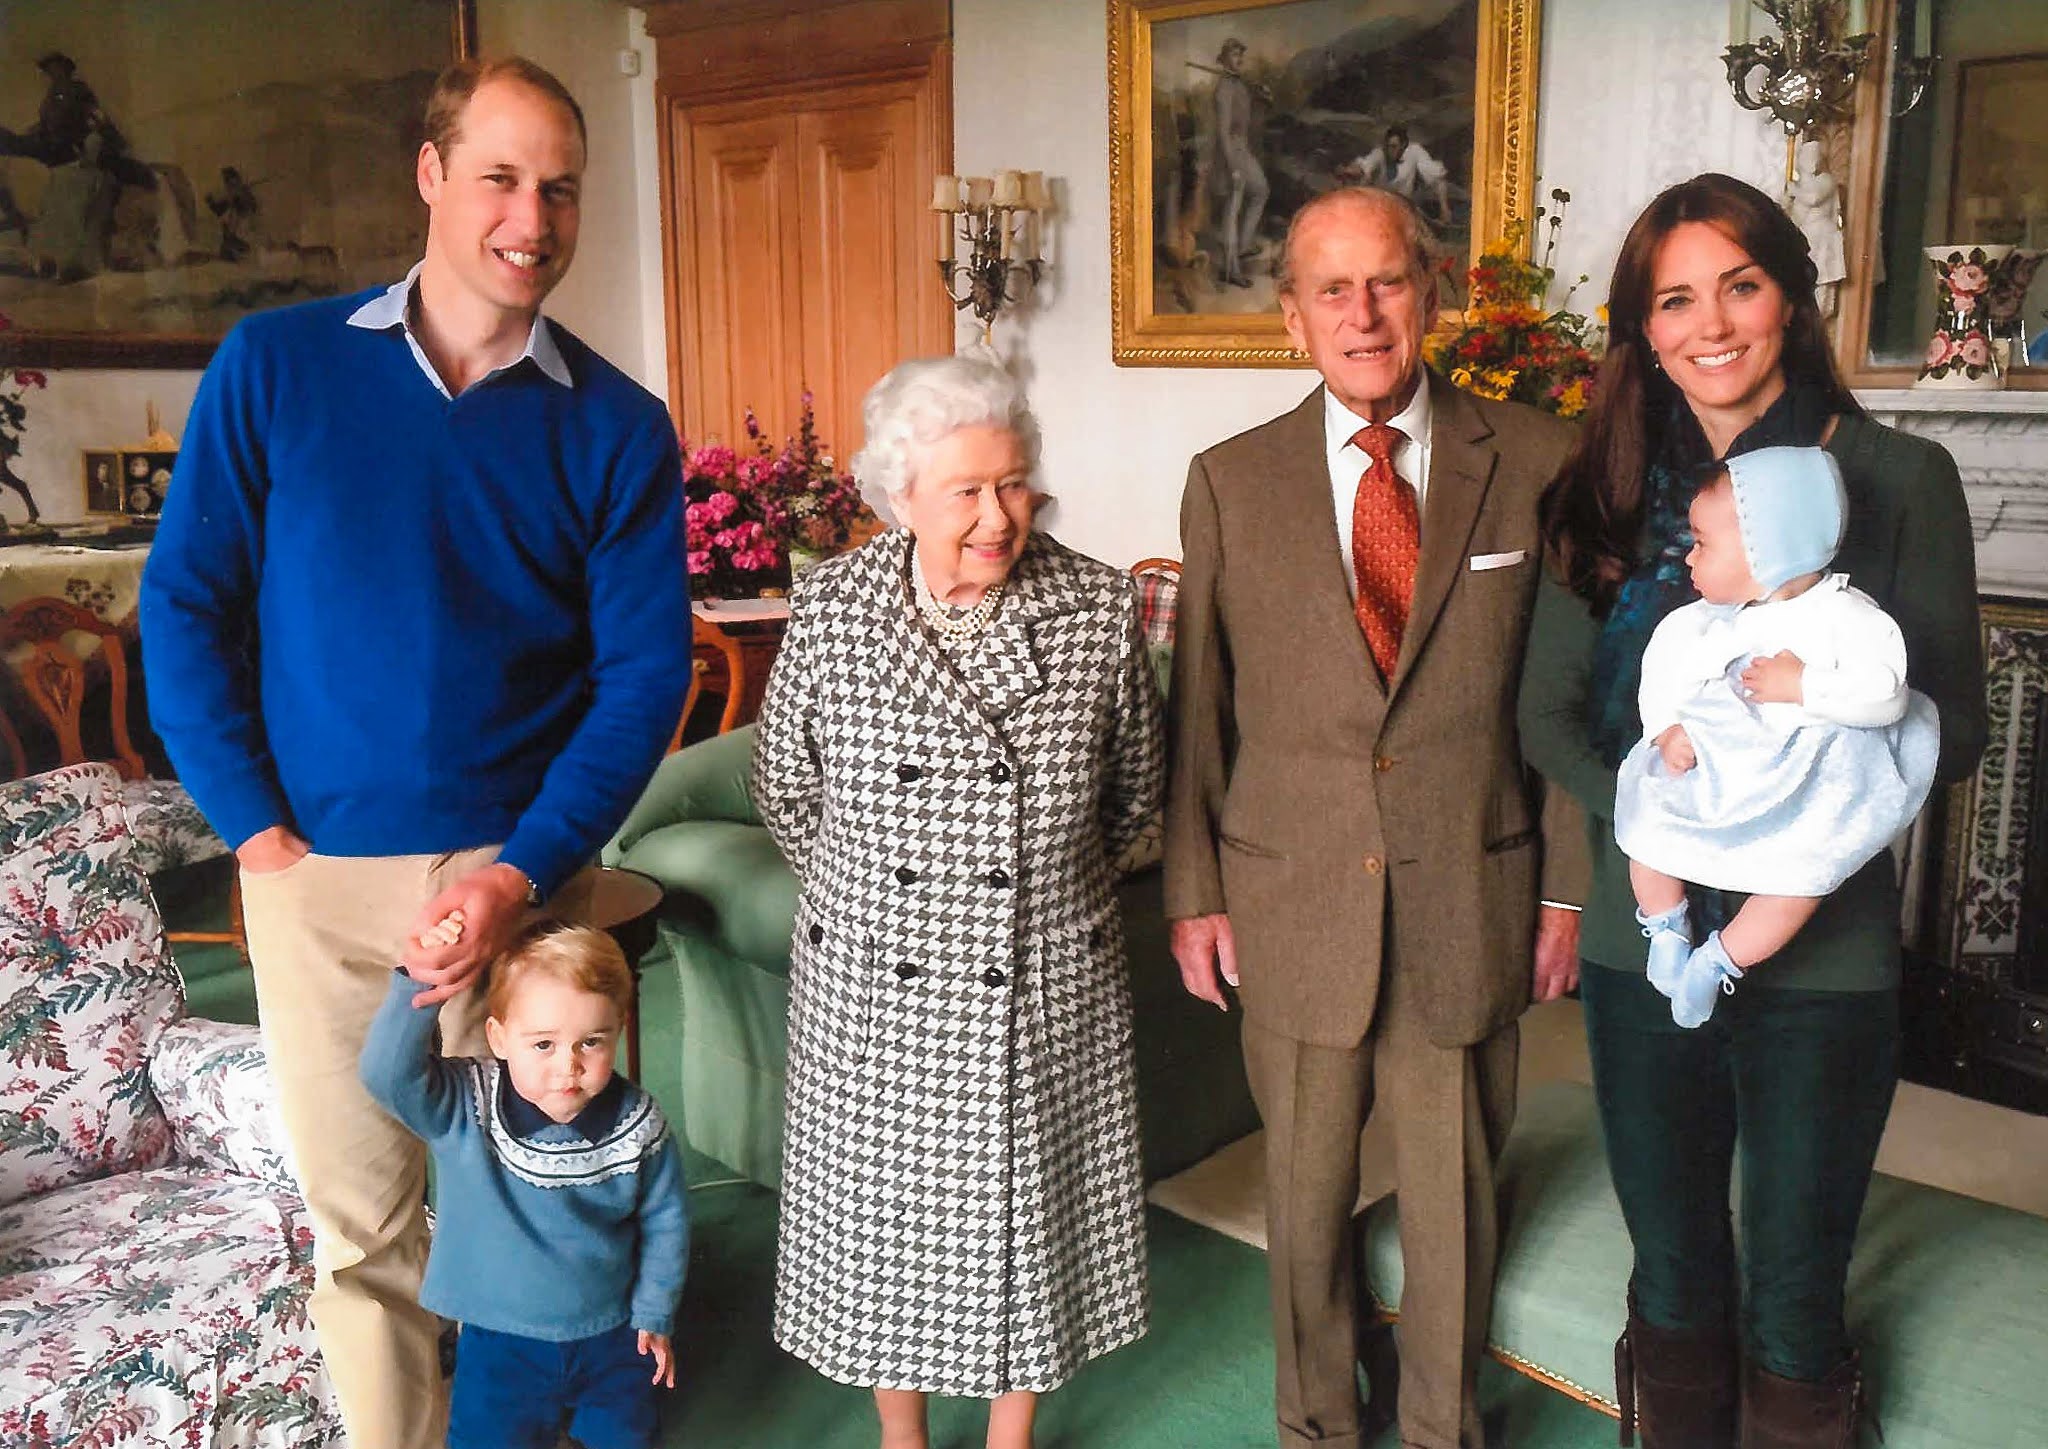 The Iron Duke, Prince Philip, left the world at the age of 99, a few months short of his 100th birthday